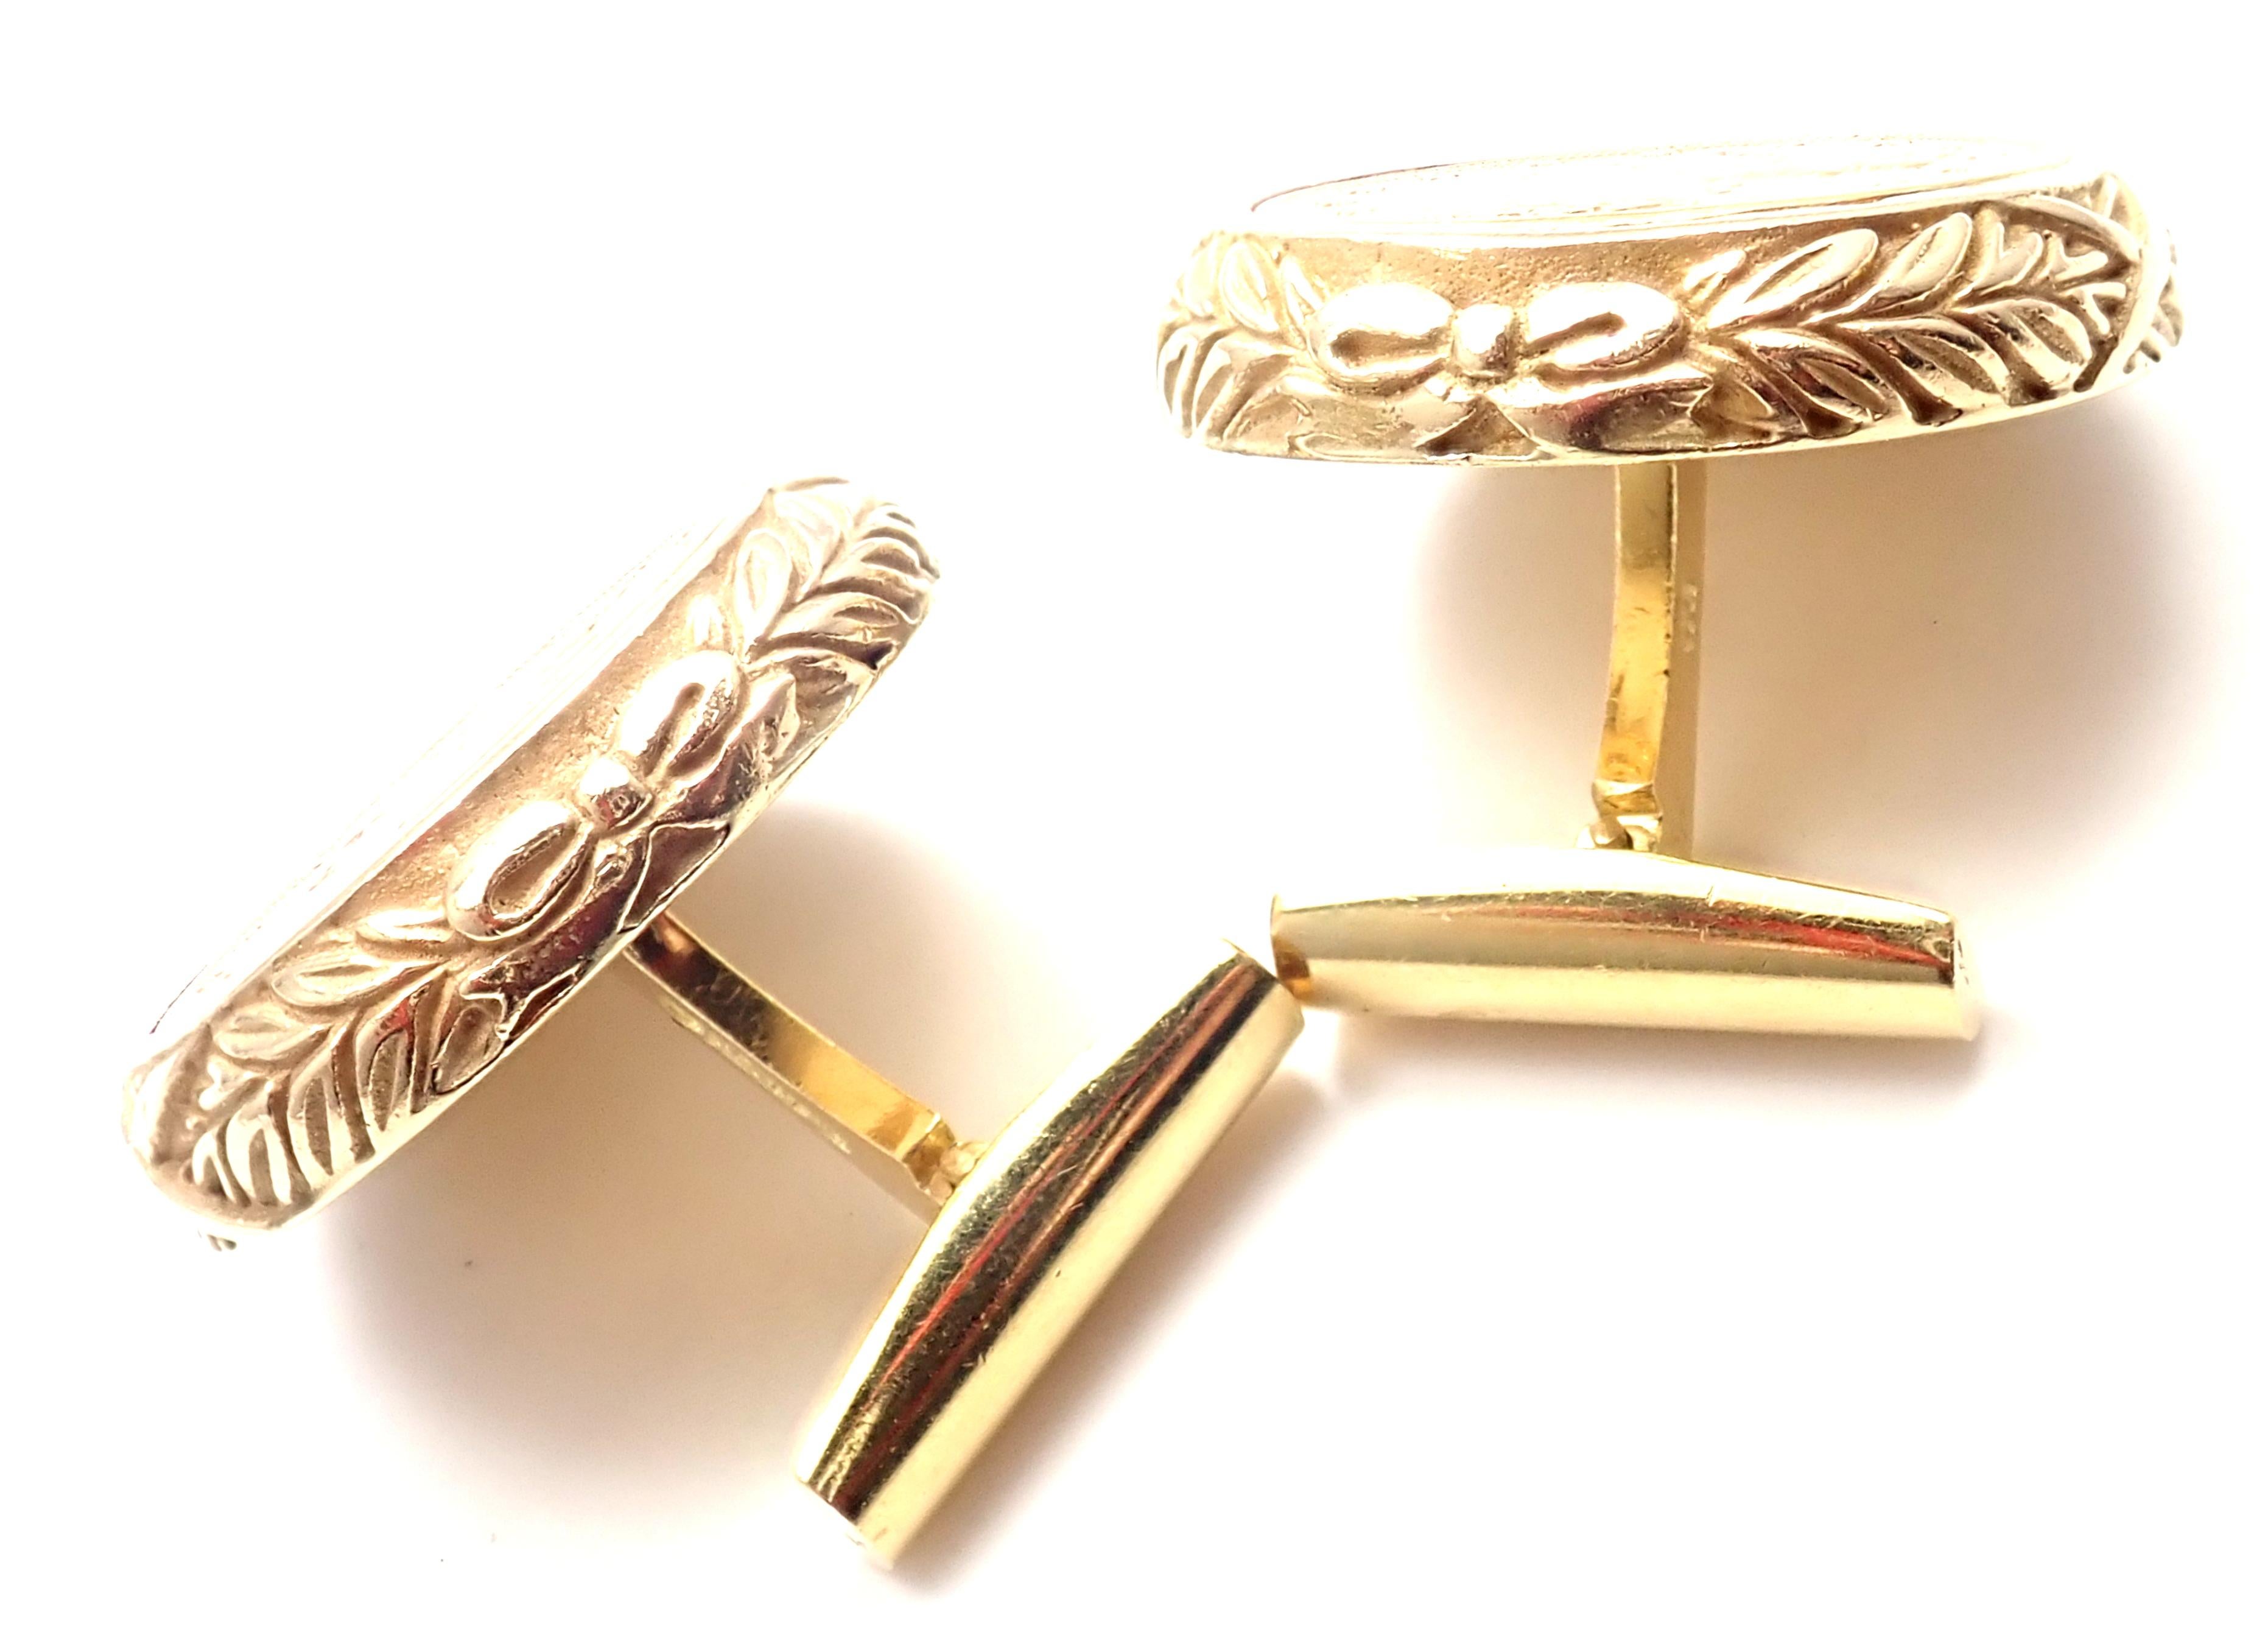 18k Yellow Gold $5 Liberty Coin Cufflinks by David Webb. 
With 2 1887 $5 Liberty Coins.
Details: 
Dimensions: 28mm x 18mm x 30mm
Weight:  44.5 grams
Stamped Hallmark: Webb 18K
*Free Shipping within the United States*
YOUR PRICE: $6,500
T1912toed